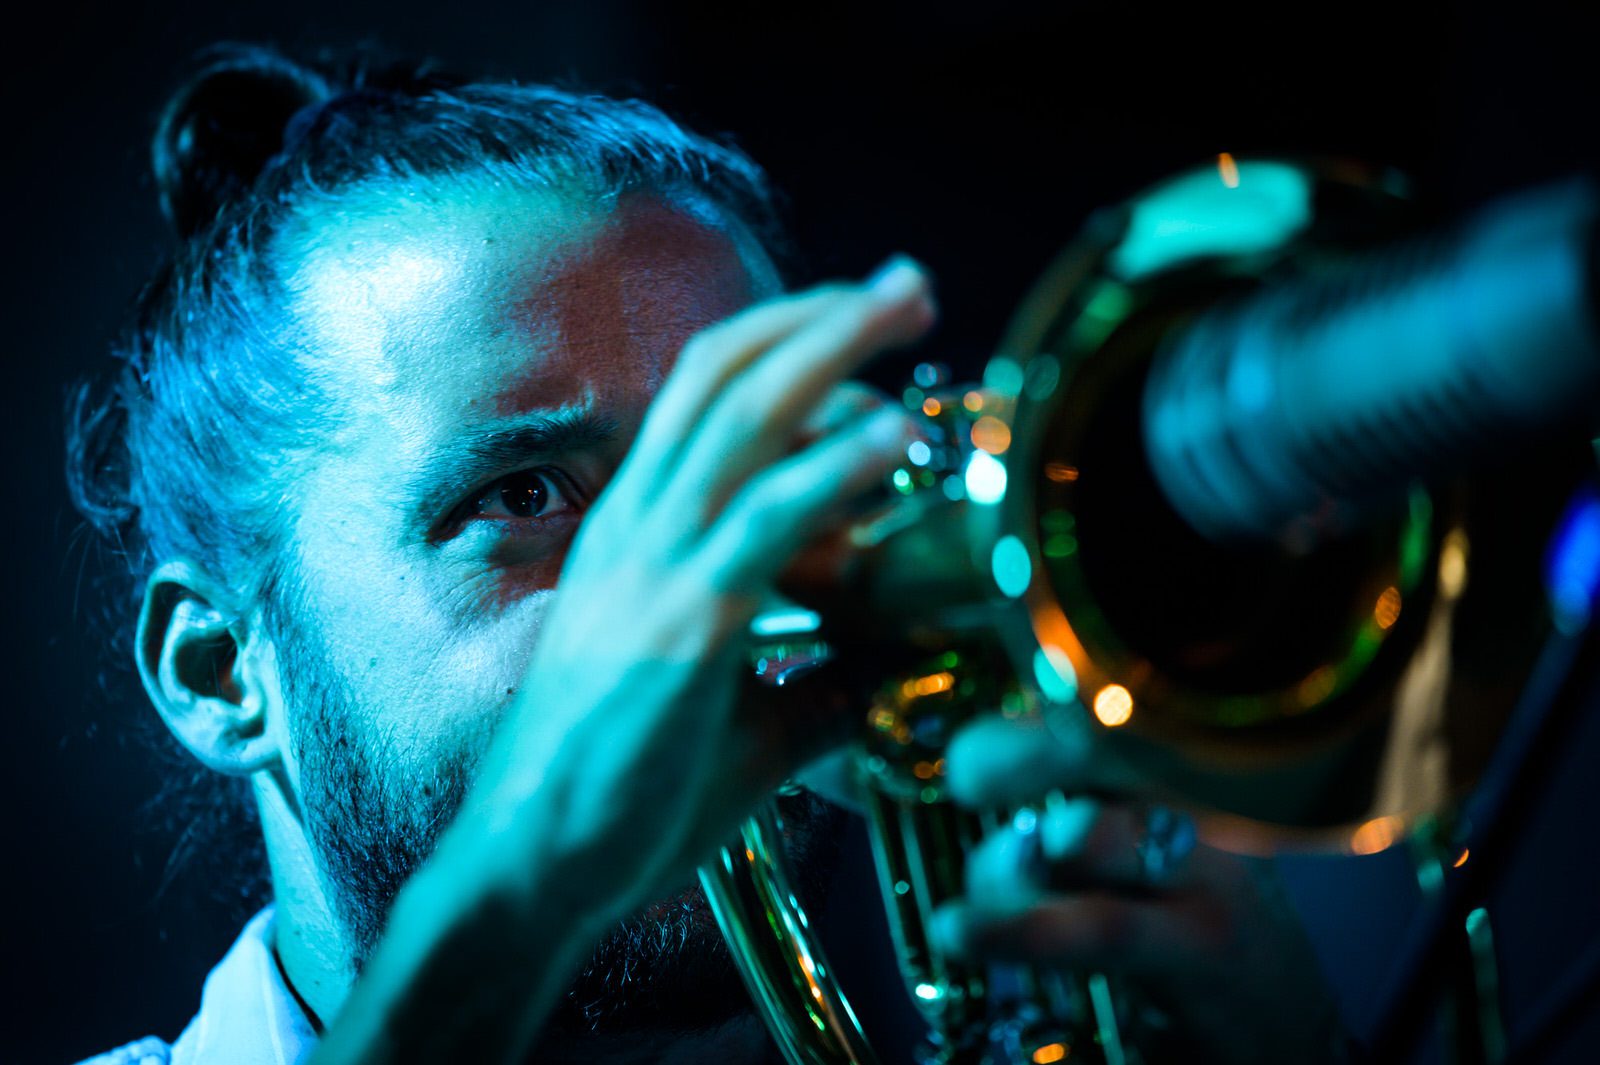 Close up of trumpet player Jay Jennings performing with Snarky Puppy on stage in concert